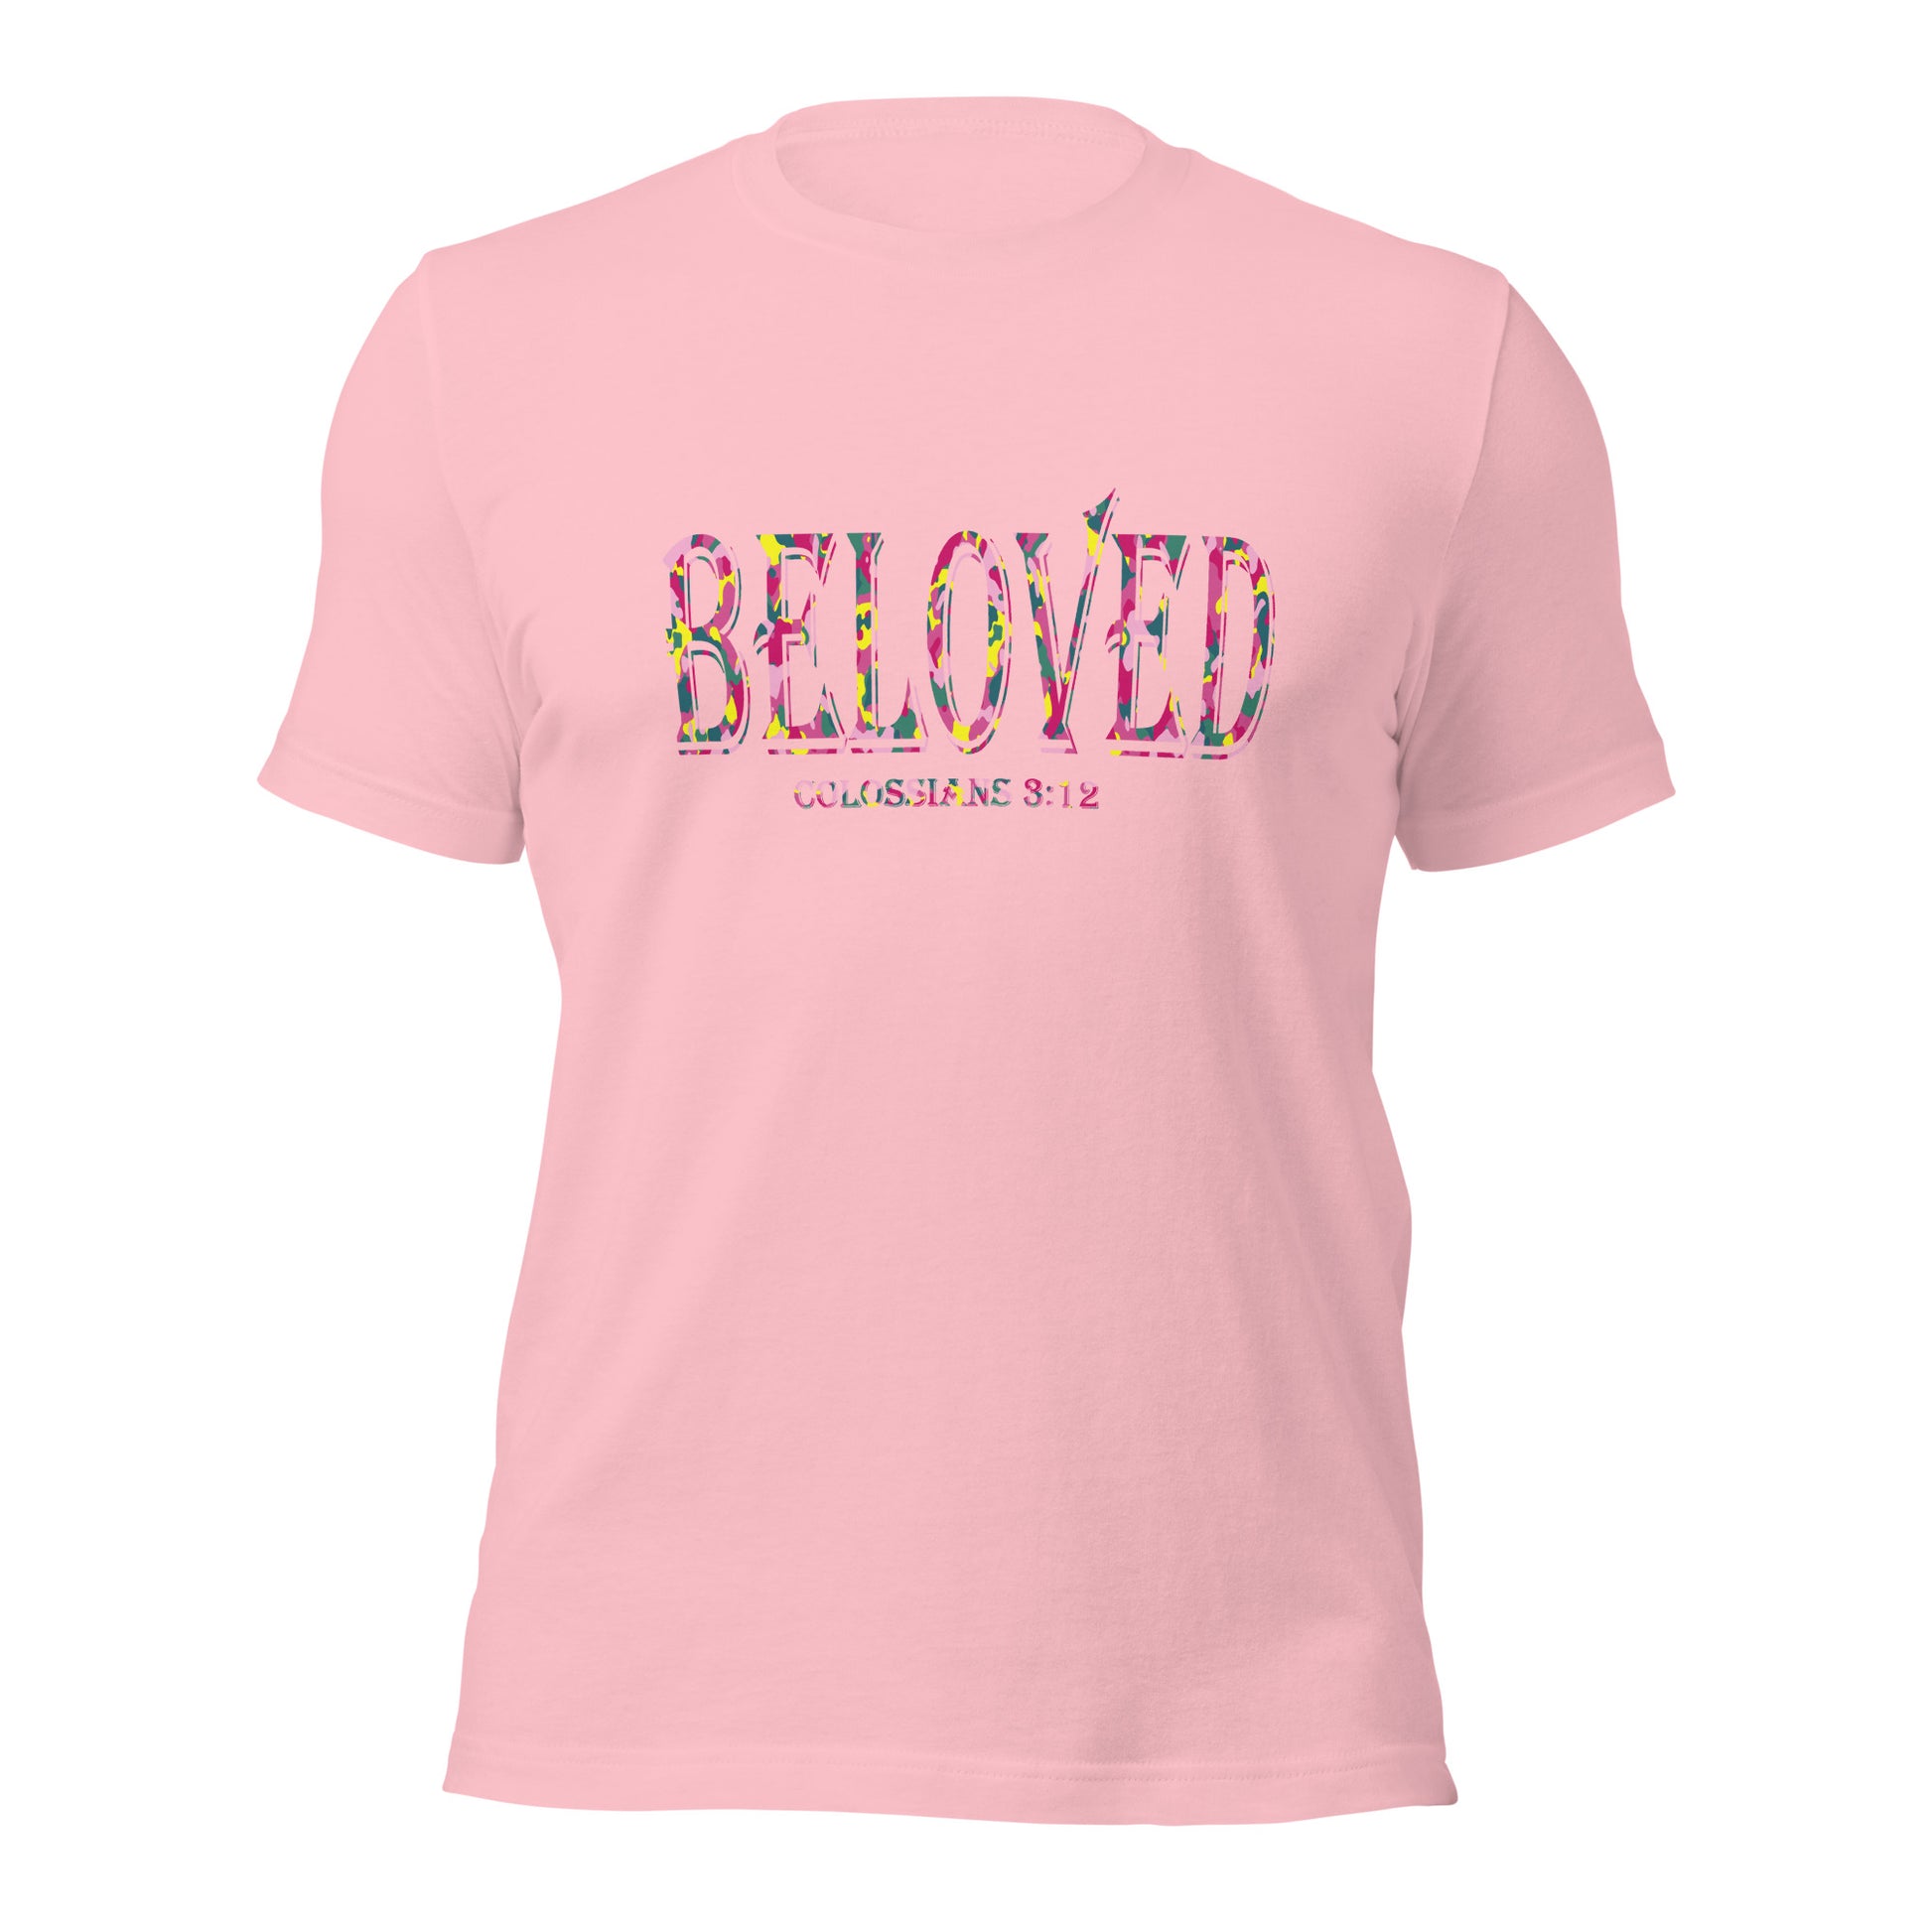 Colossians 3:12 Beloved T-shirt pink